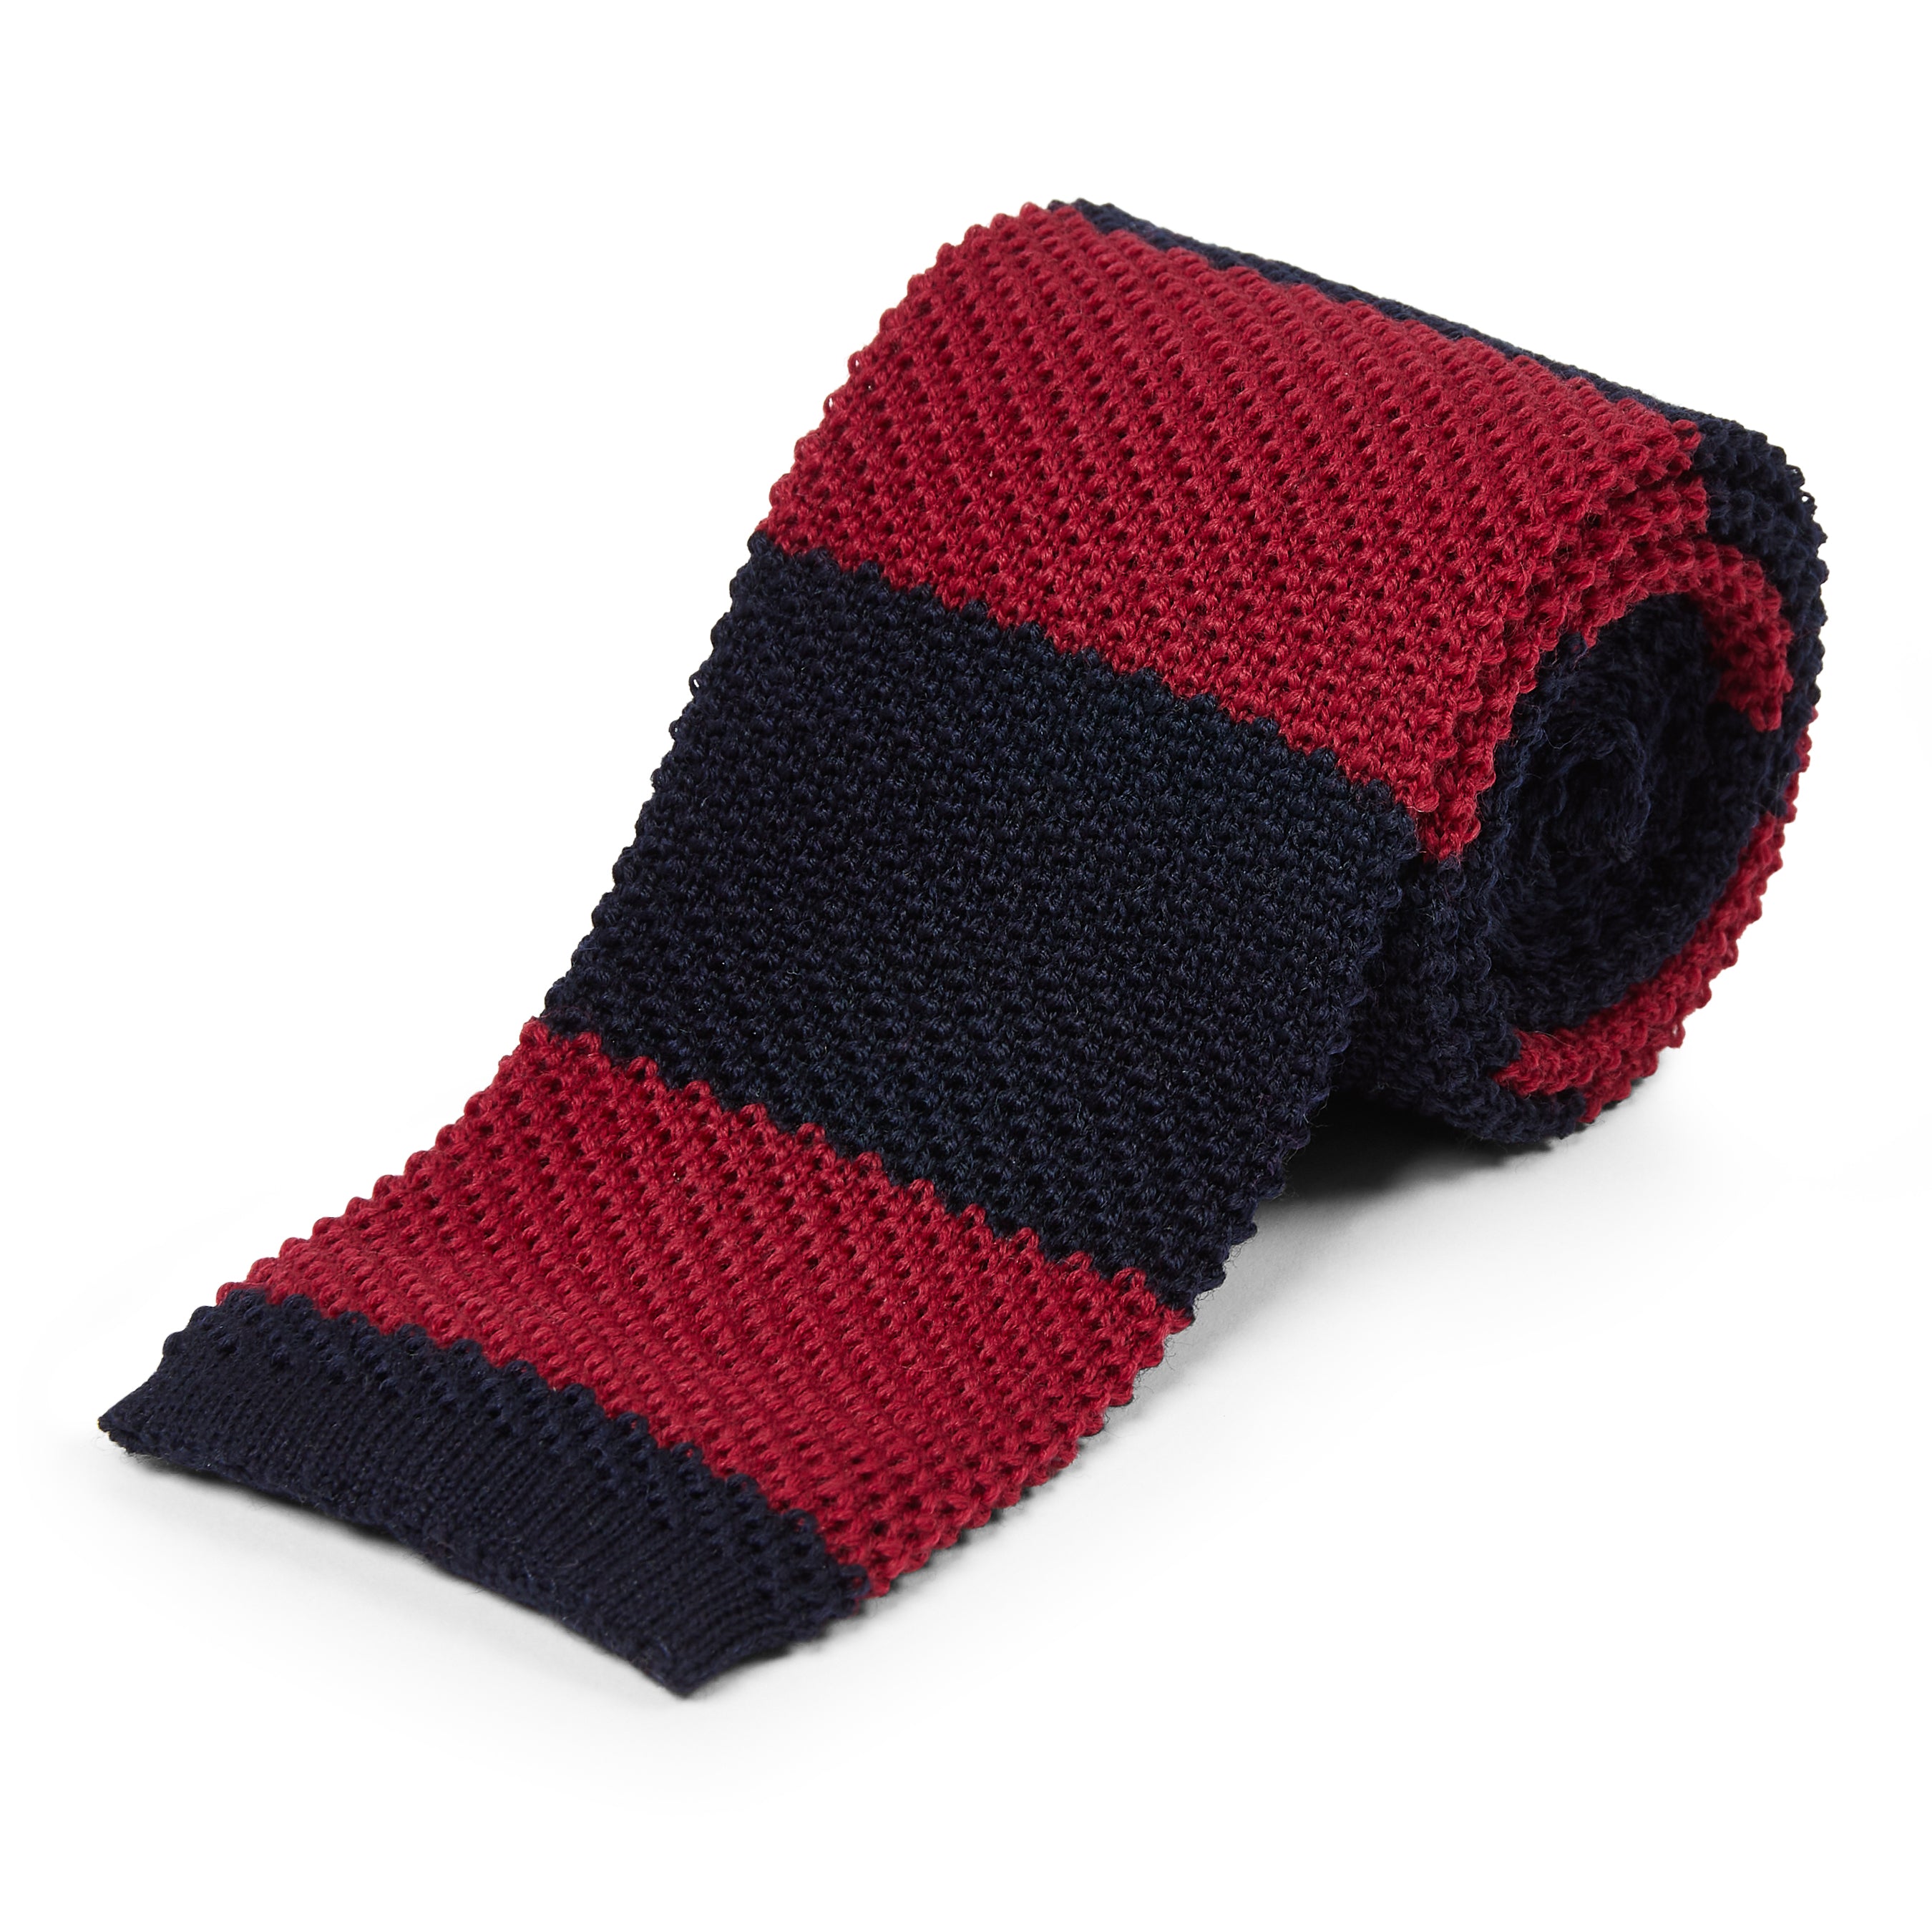 Burrows & Hare  Knitted Tie - Stripe Red/black